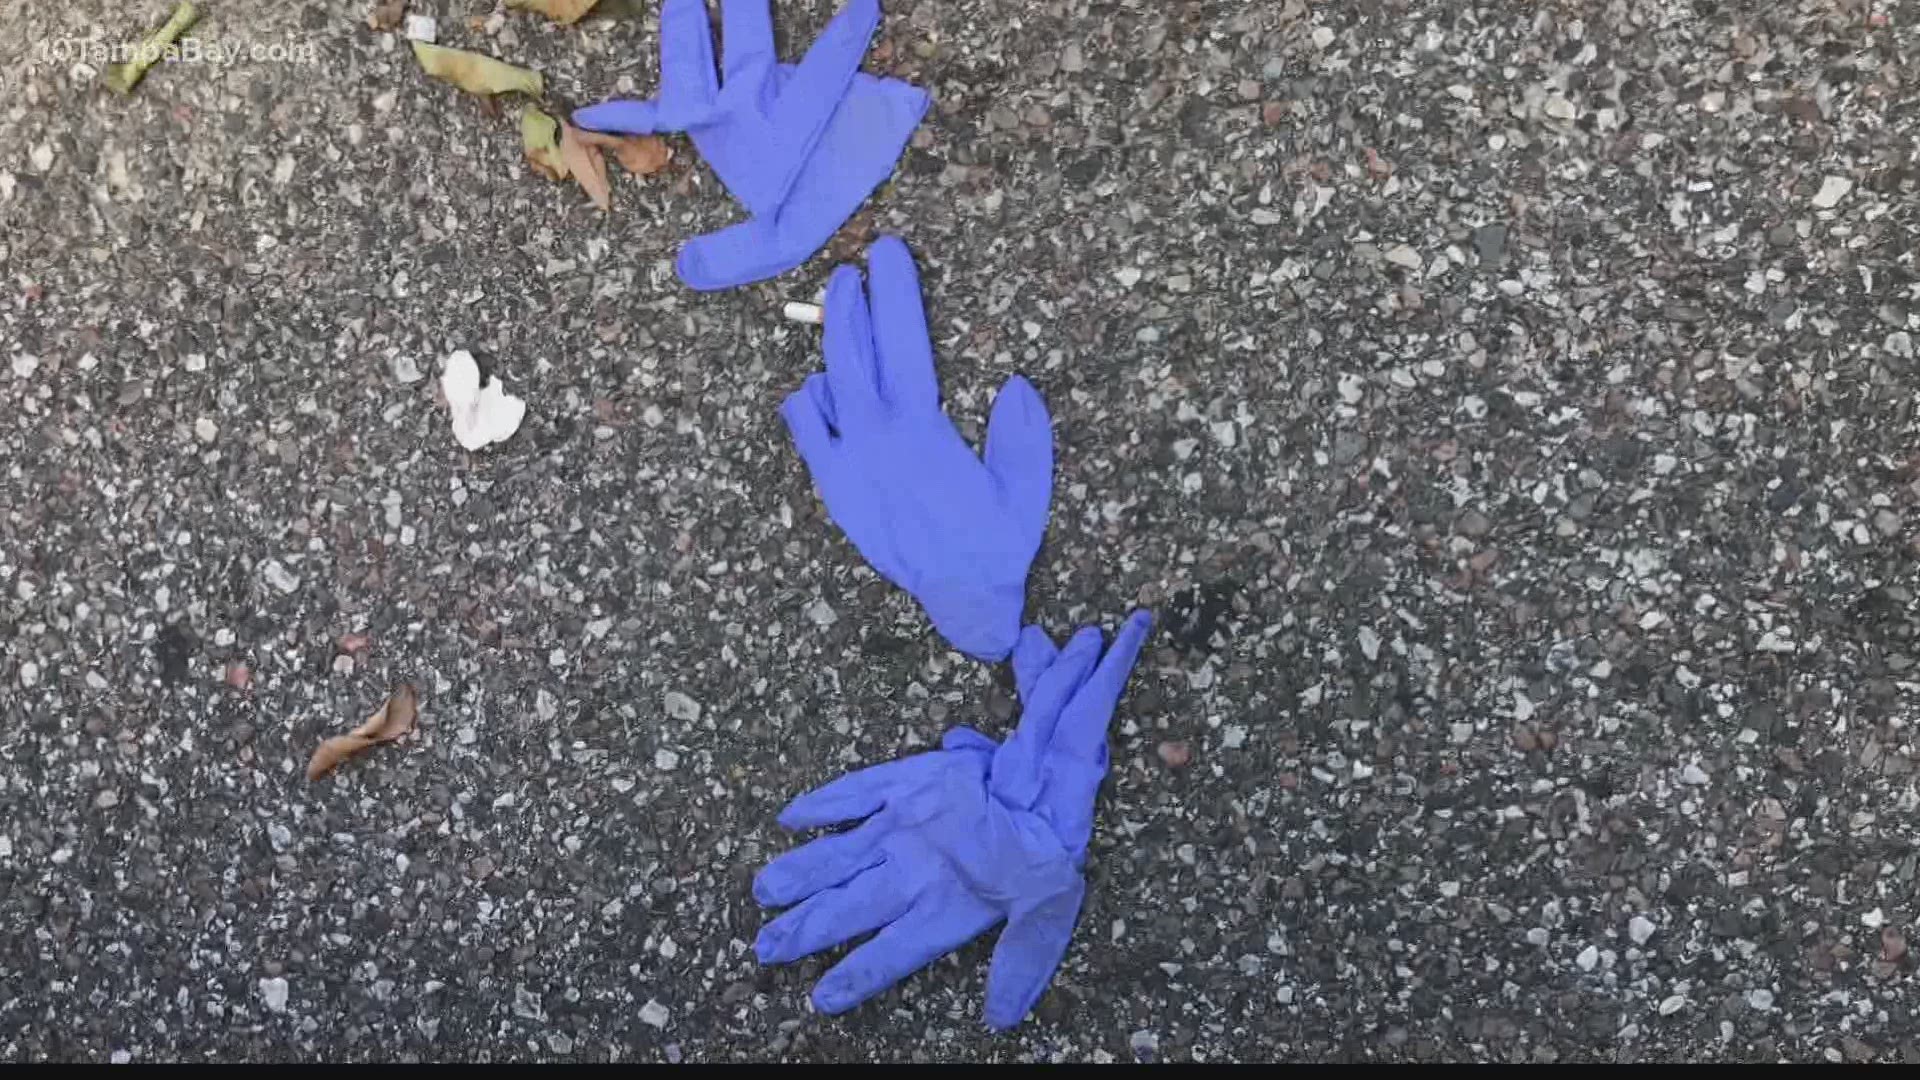 Litter is already an issue, but now people are tossing used gloves and masks on the ground, too.